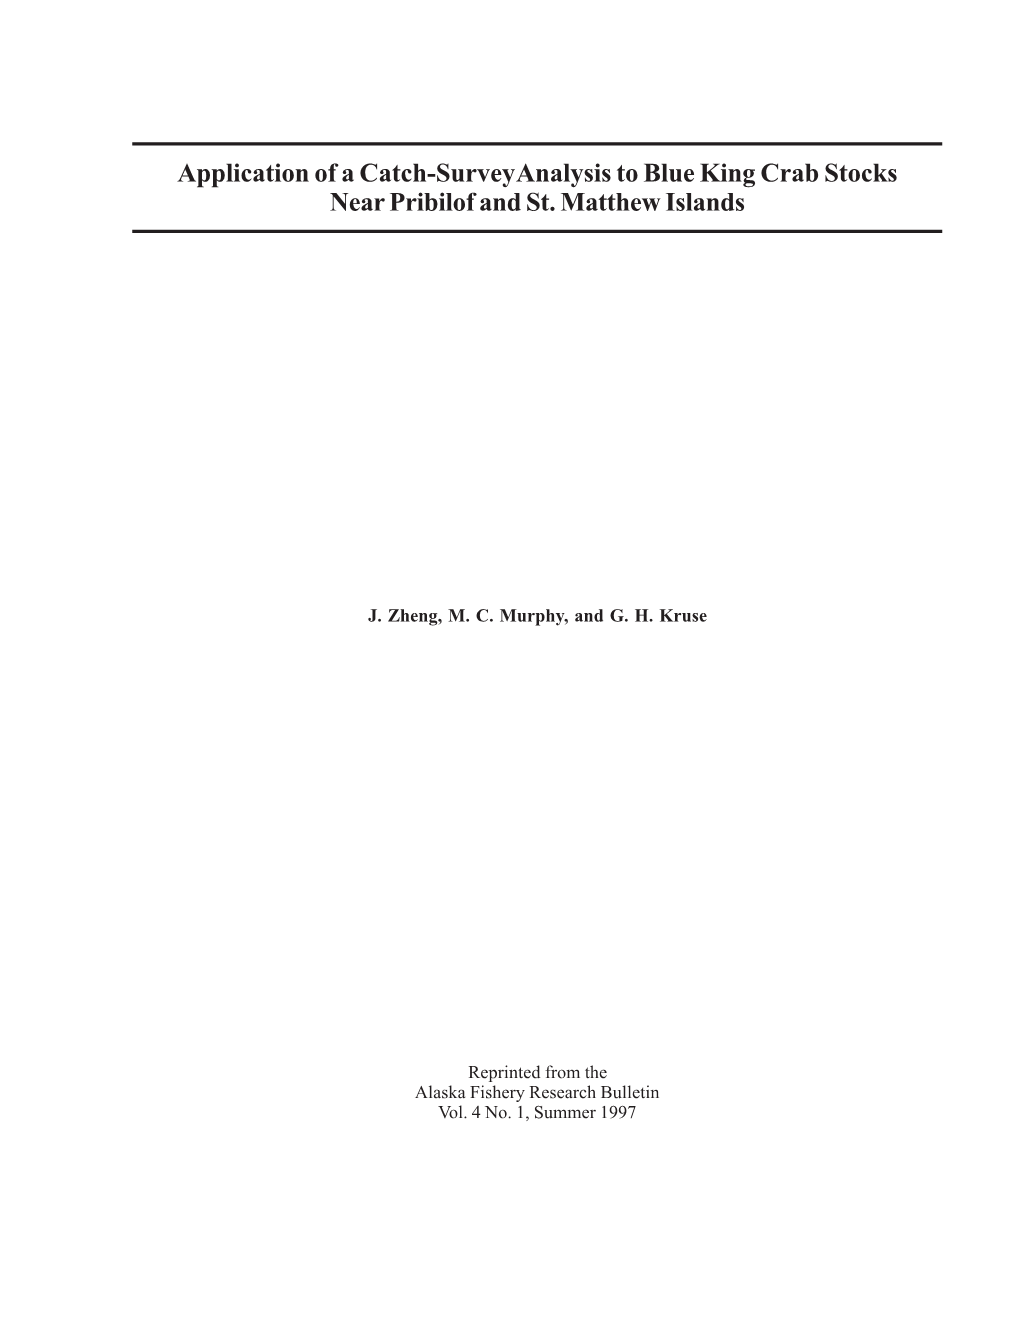 Application of a Catch-Survey Analysis to Blue King Crab Stocks Near Pribilof and St